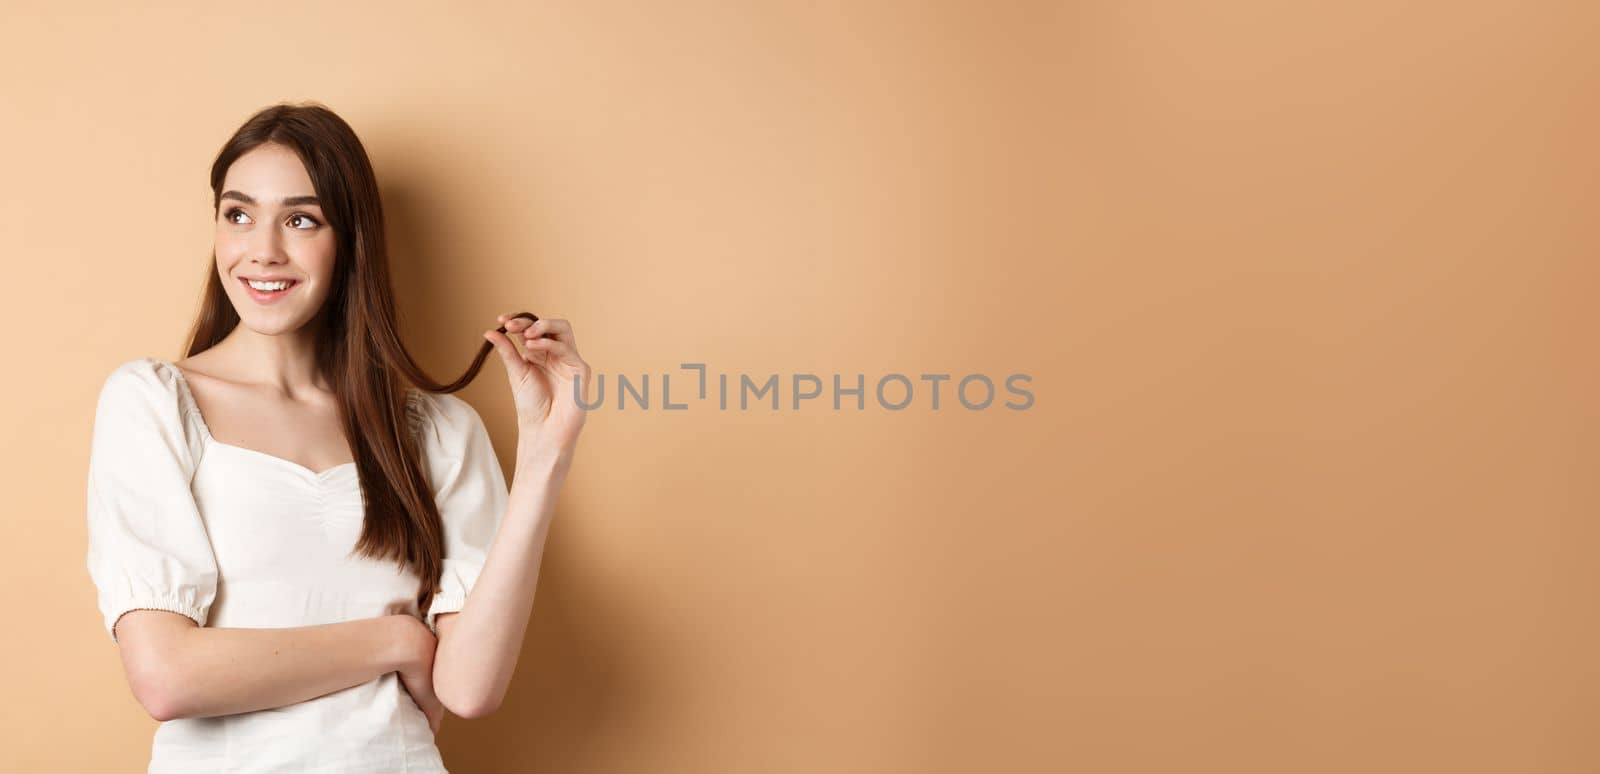 Romantic pensive girl thinking, looking left at empty space and playing with hair strand, smiling dreamy, standing in white dress on beige background.